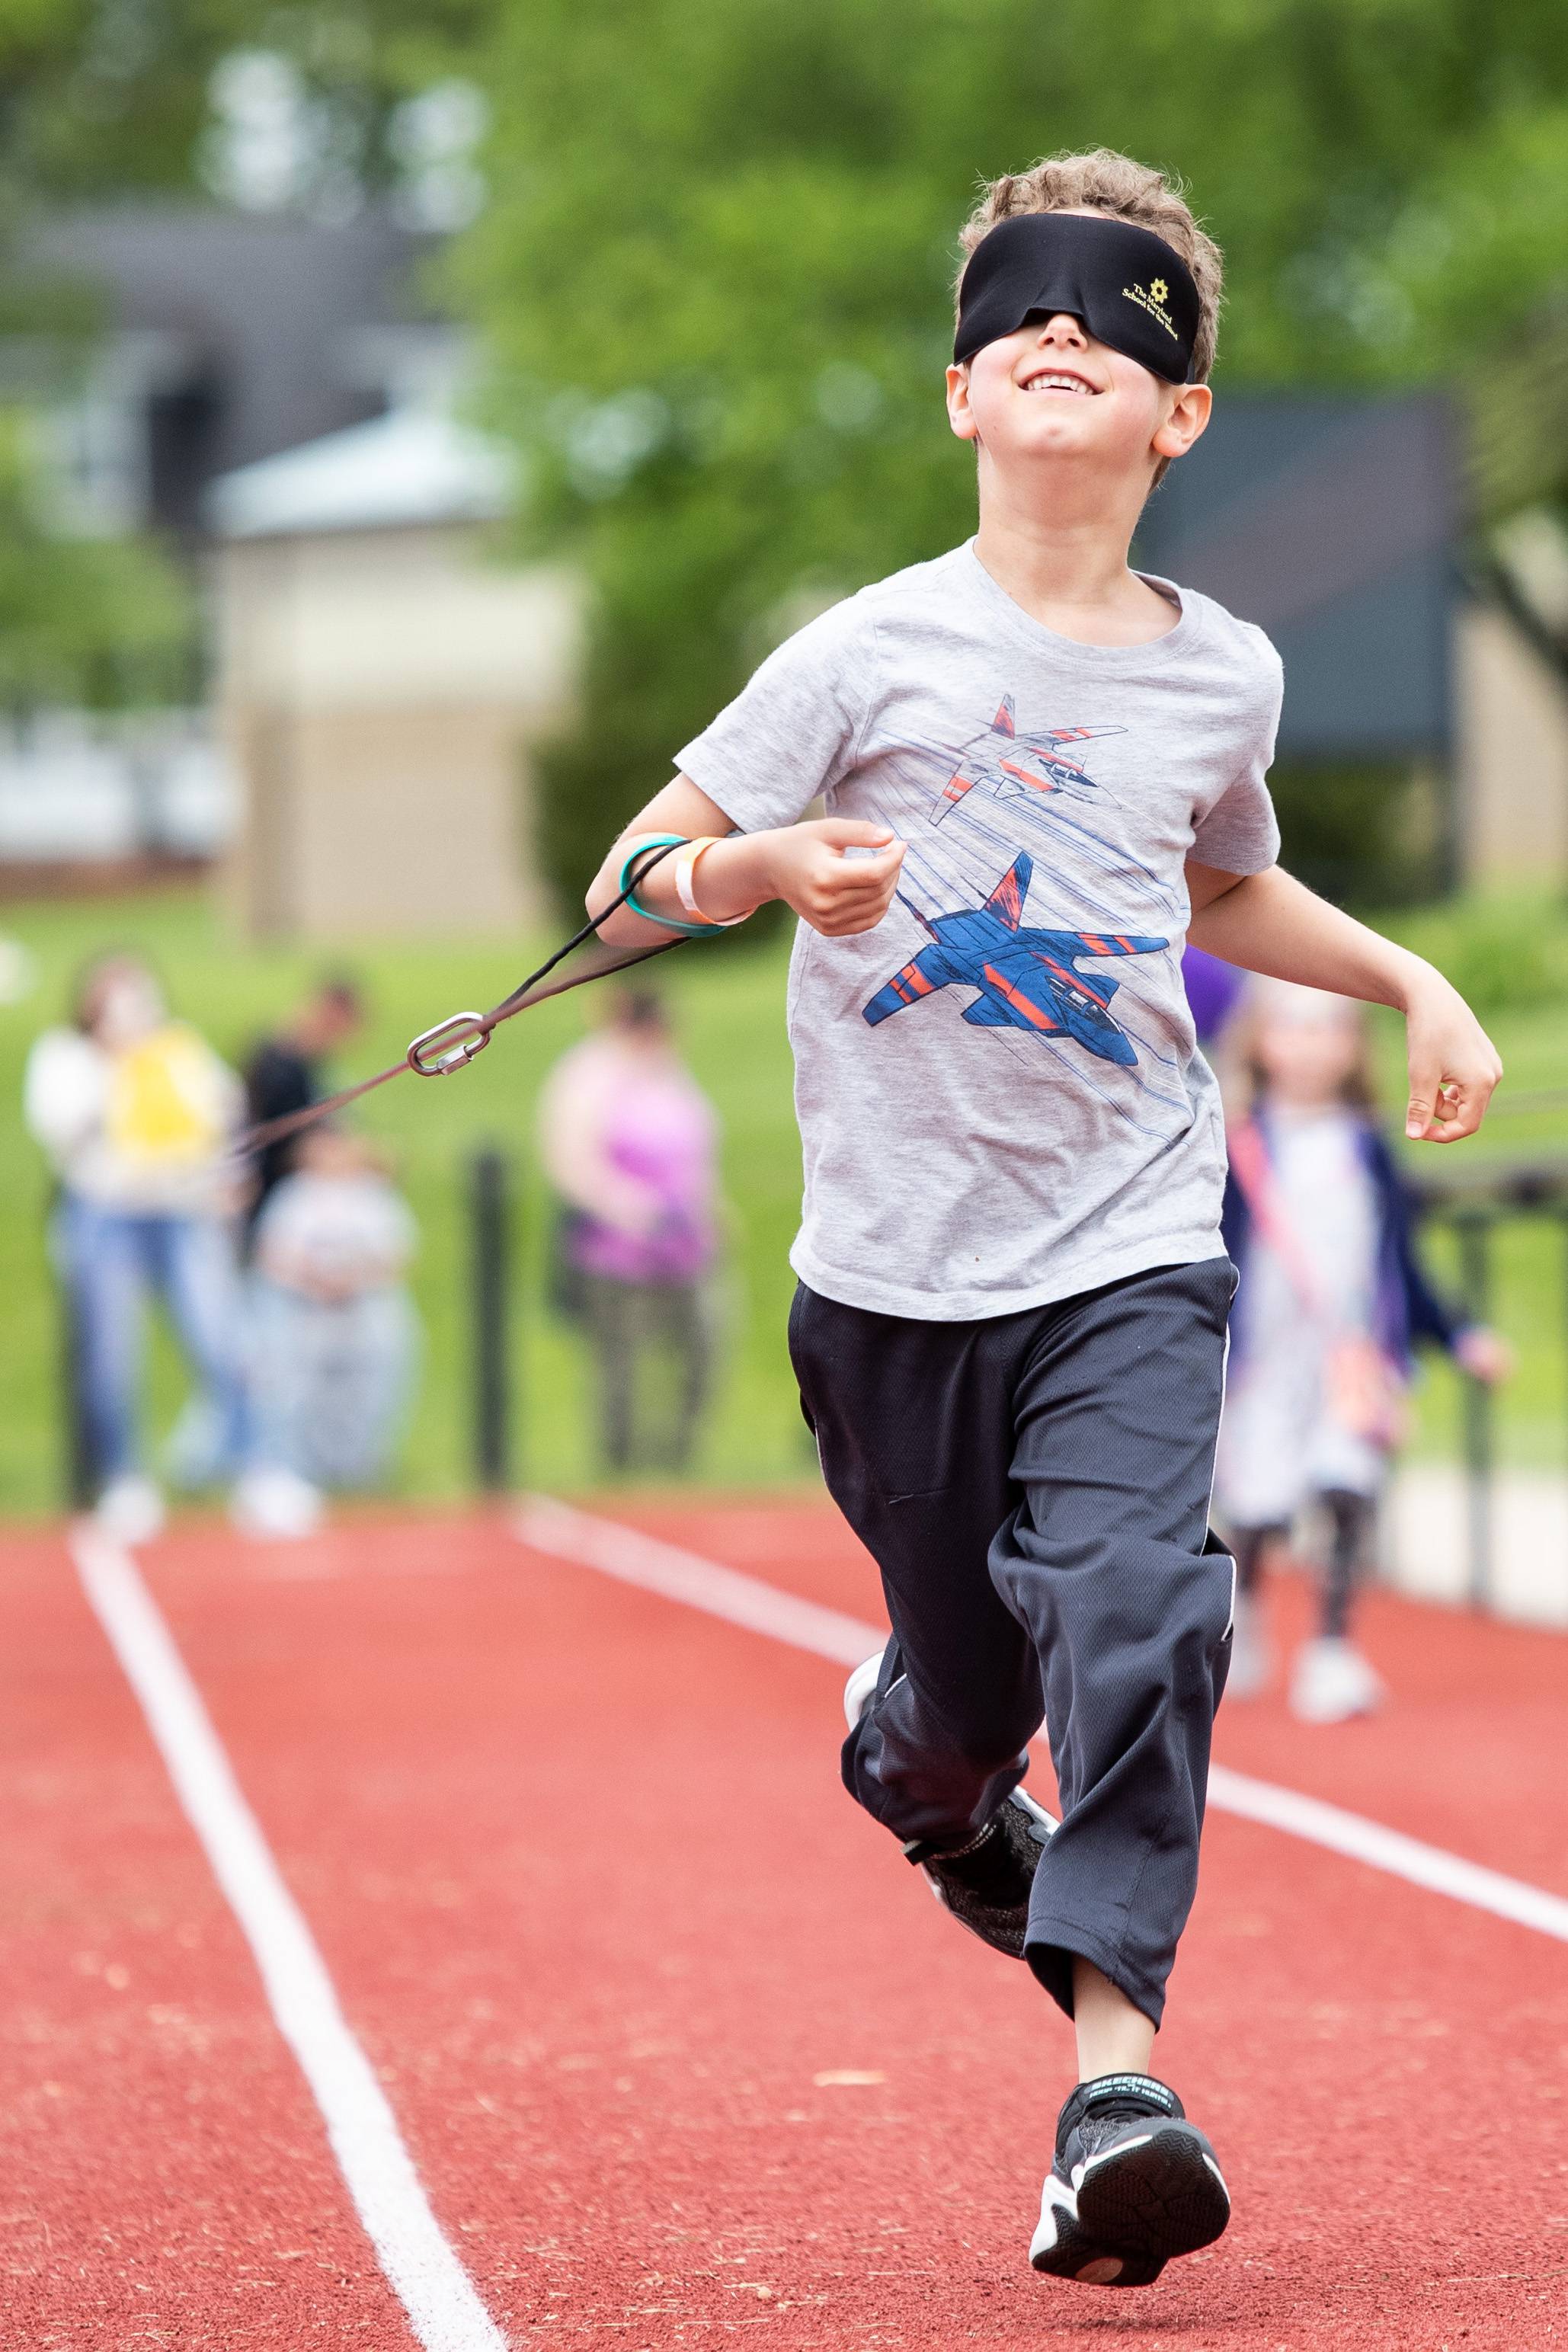 A young boy runs on The Maryland School for the Blind sprint track, with eyeshades, at the See Beyond festival.